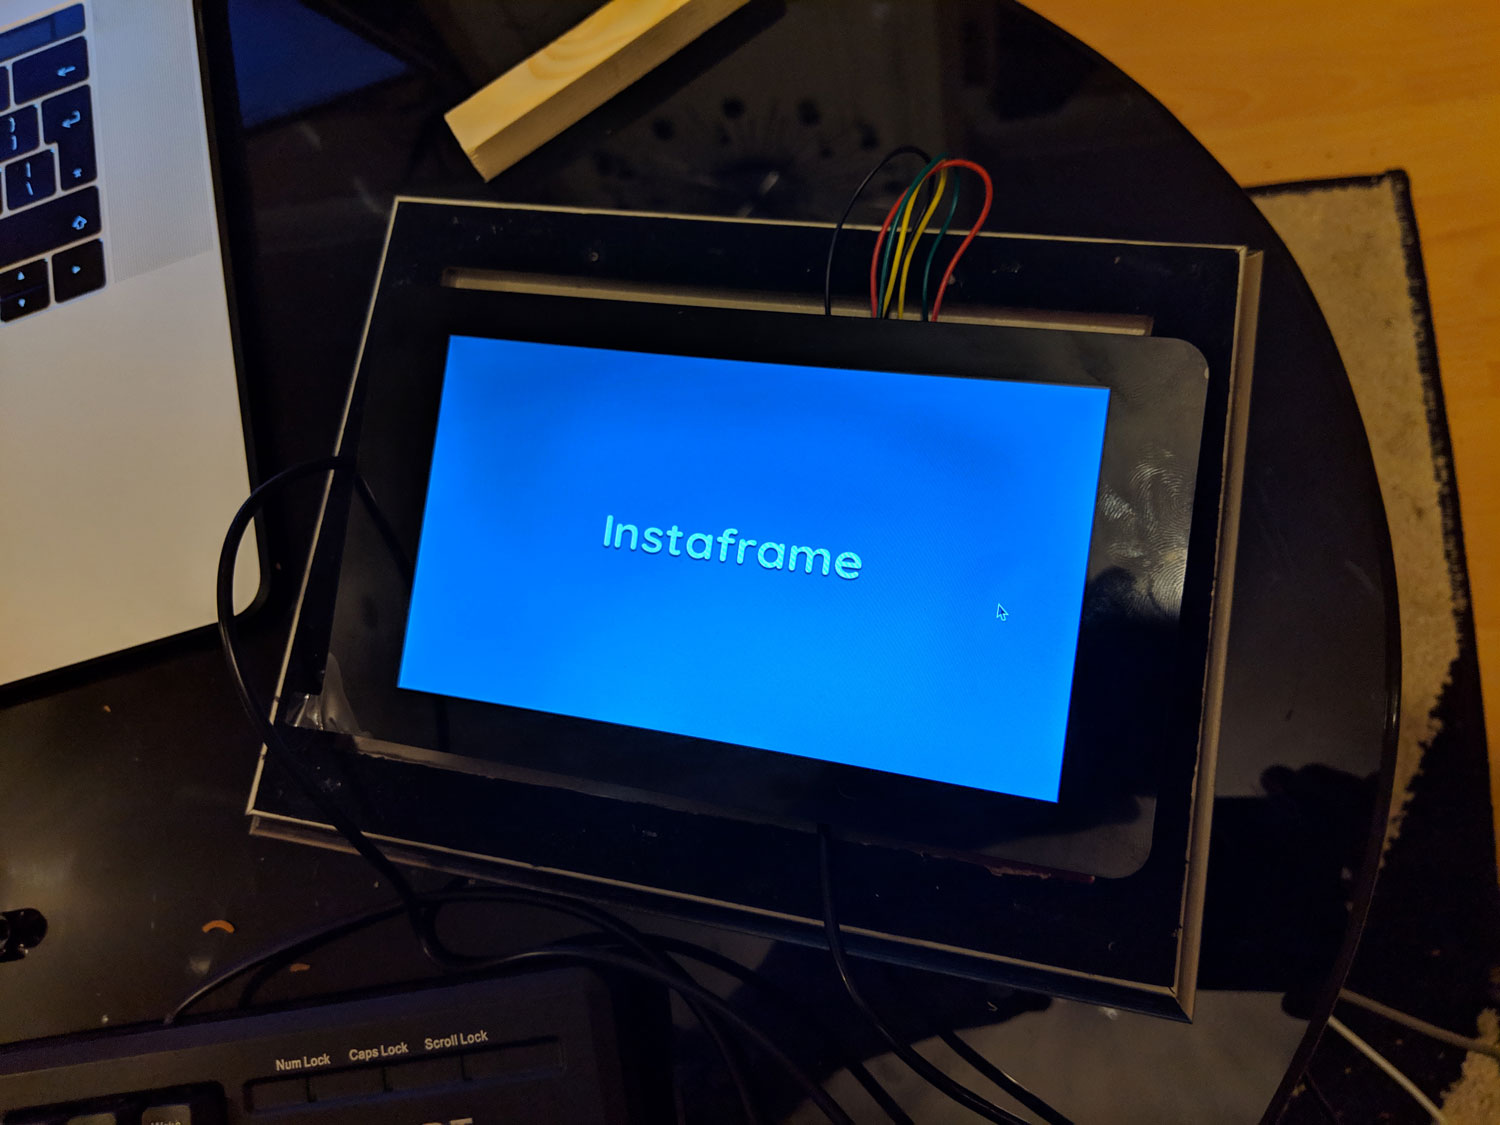 An image of the Instaframe Electron app being run in the frame.